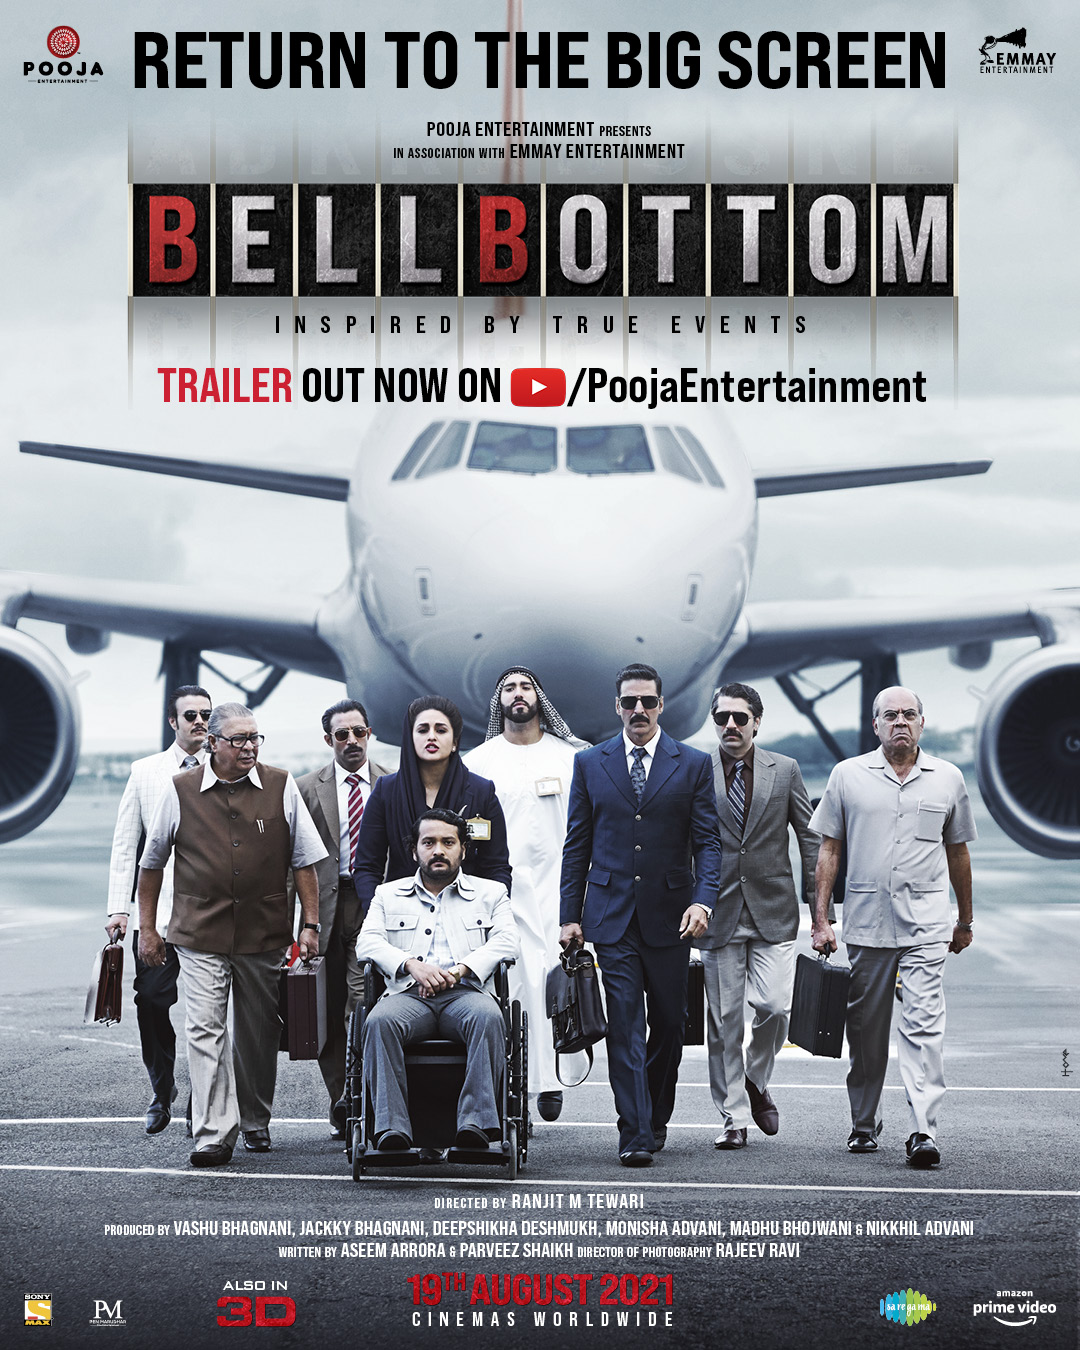 Akshay Kumar Is The One-Man Army In The Enthralling BellBottom Trailer !